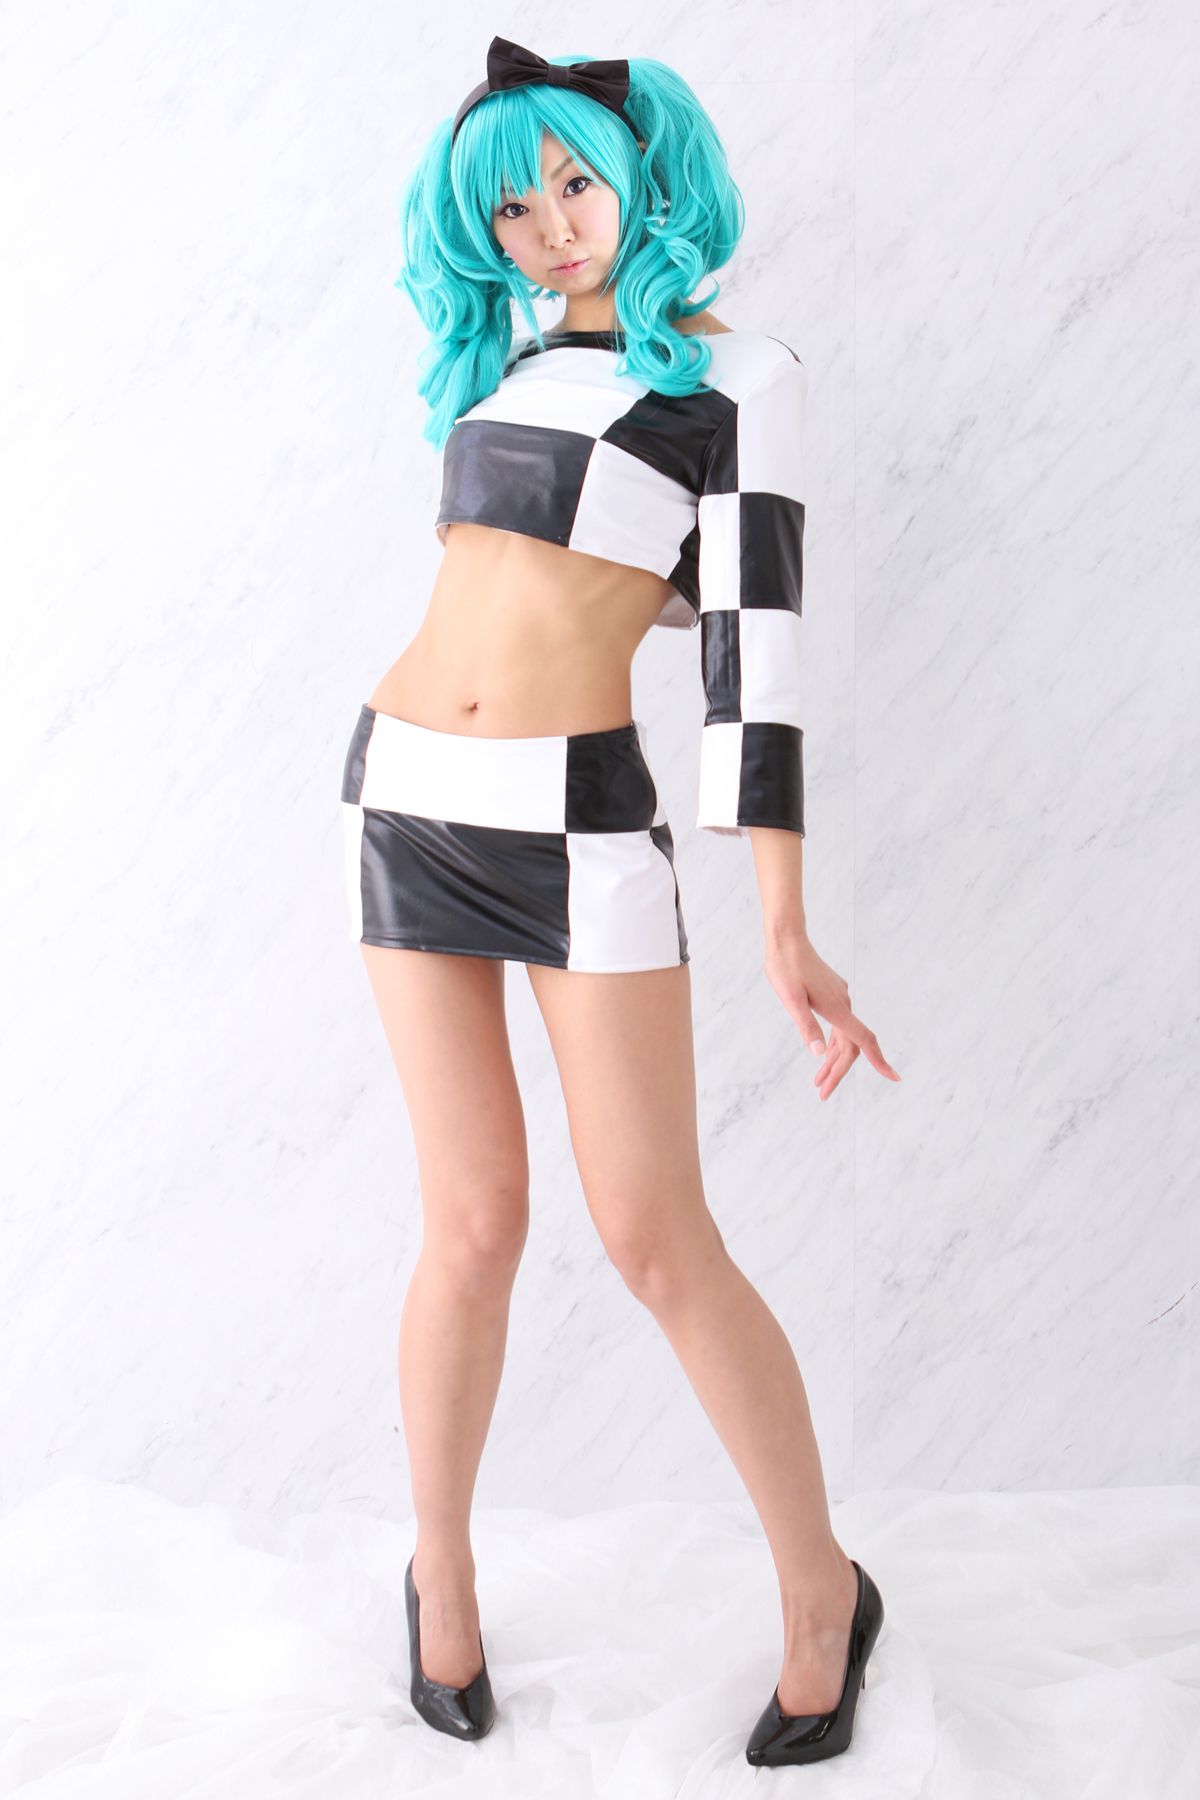 taotuhome[Cosplay套图] New Hatsune Miku from Vocaloid - So Sexy第2张